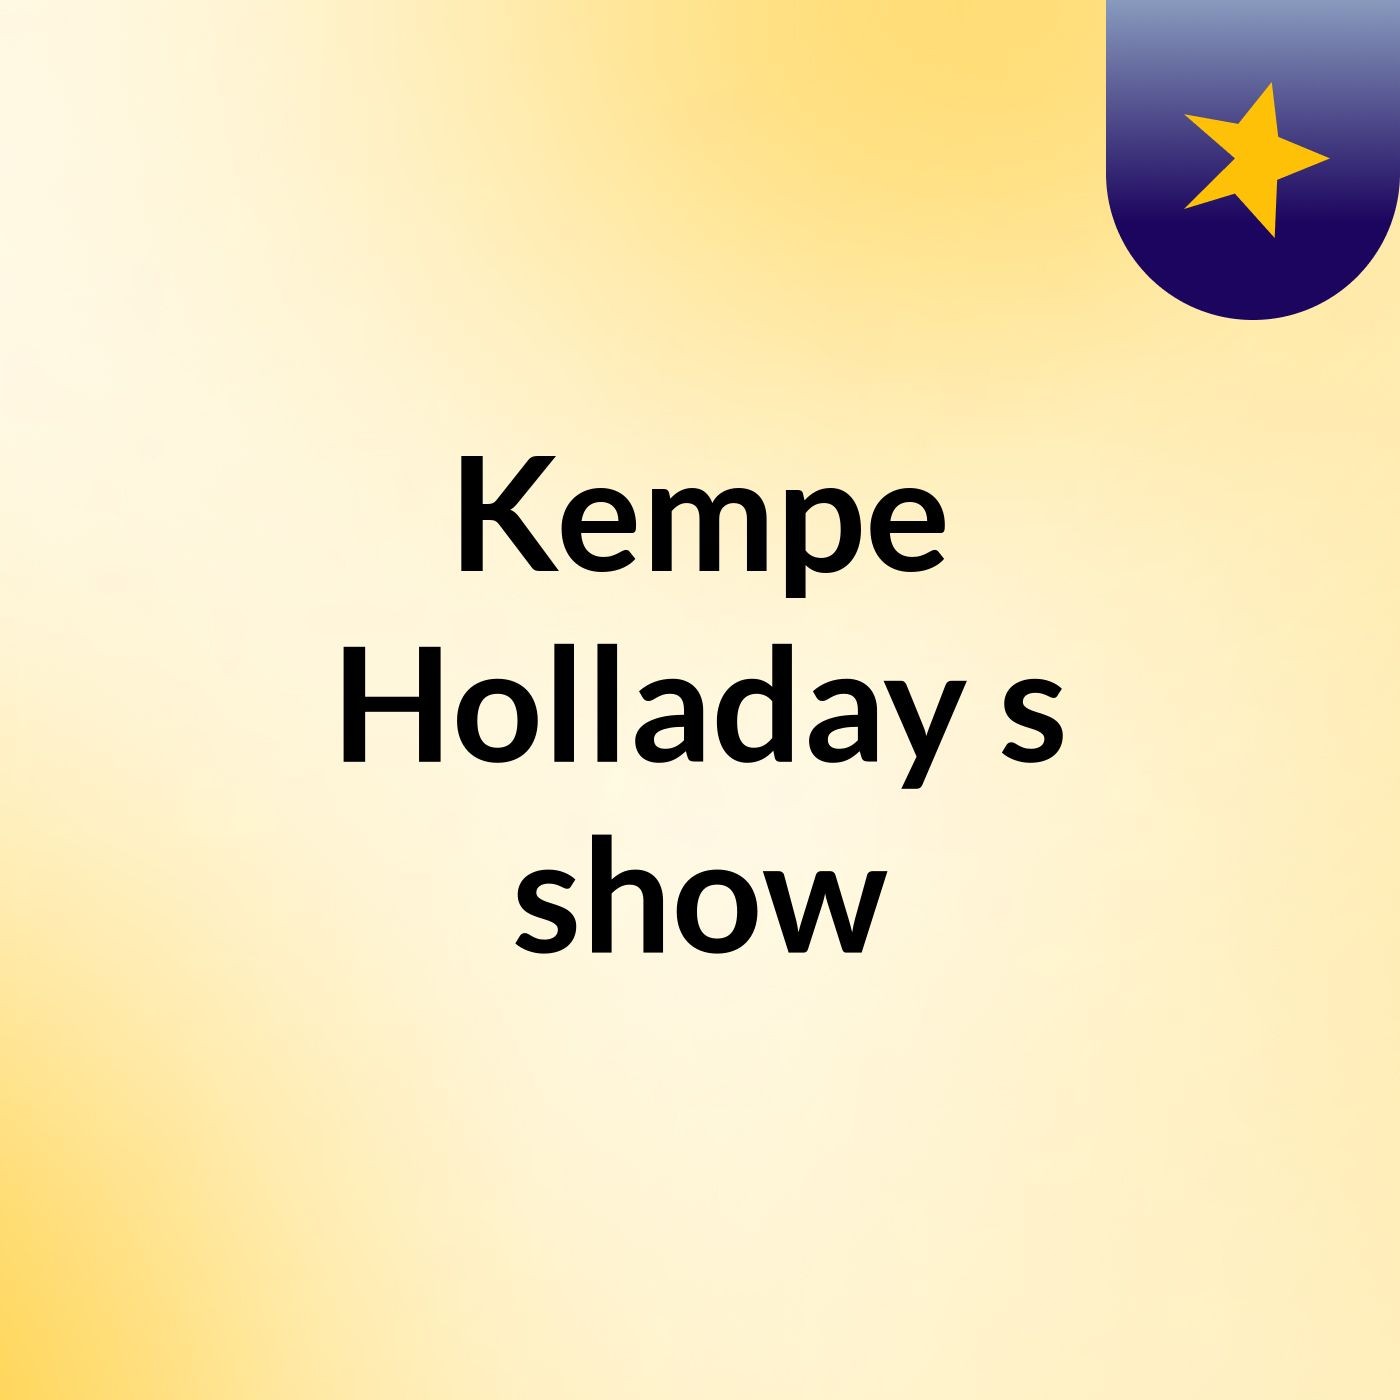 Kempe Holladay's show